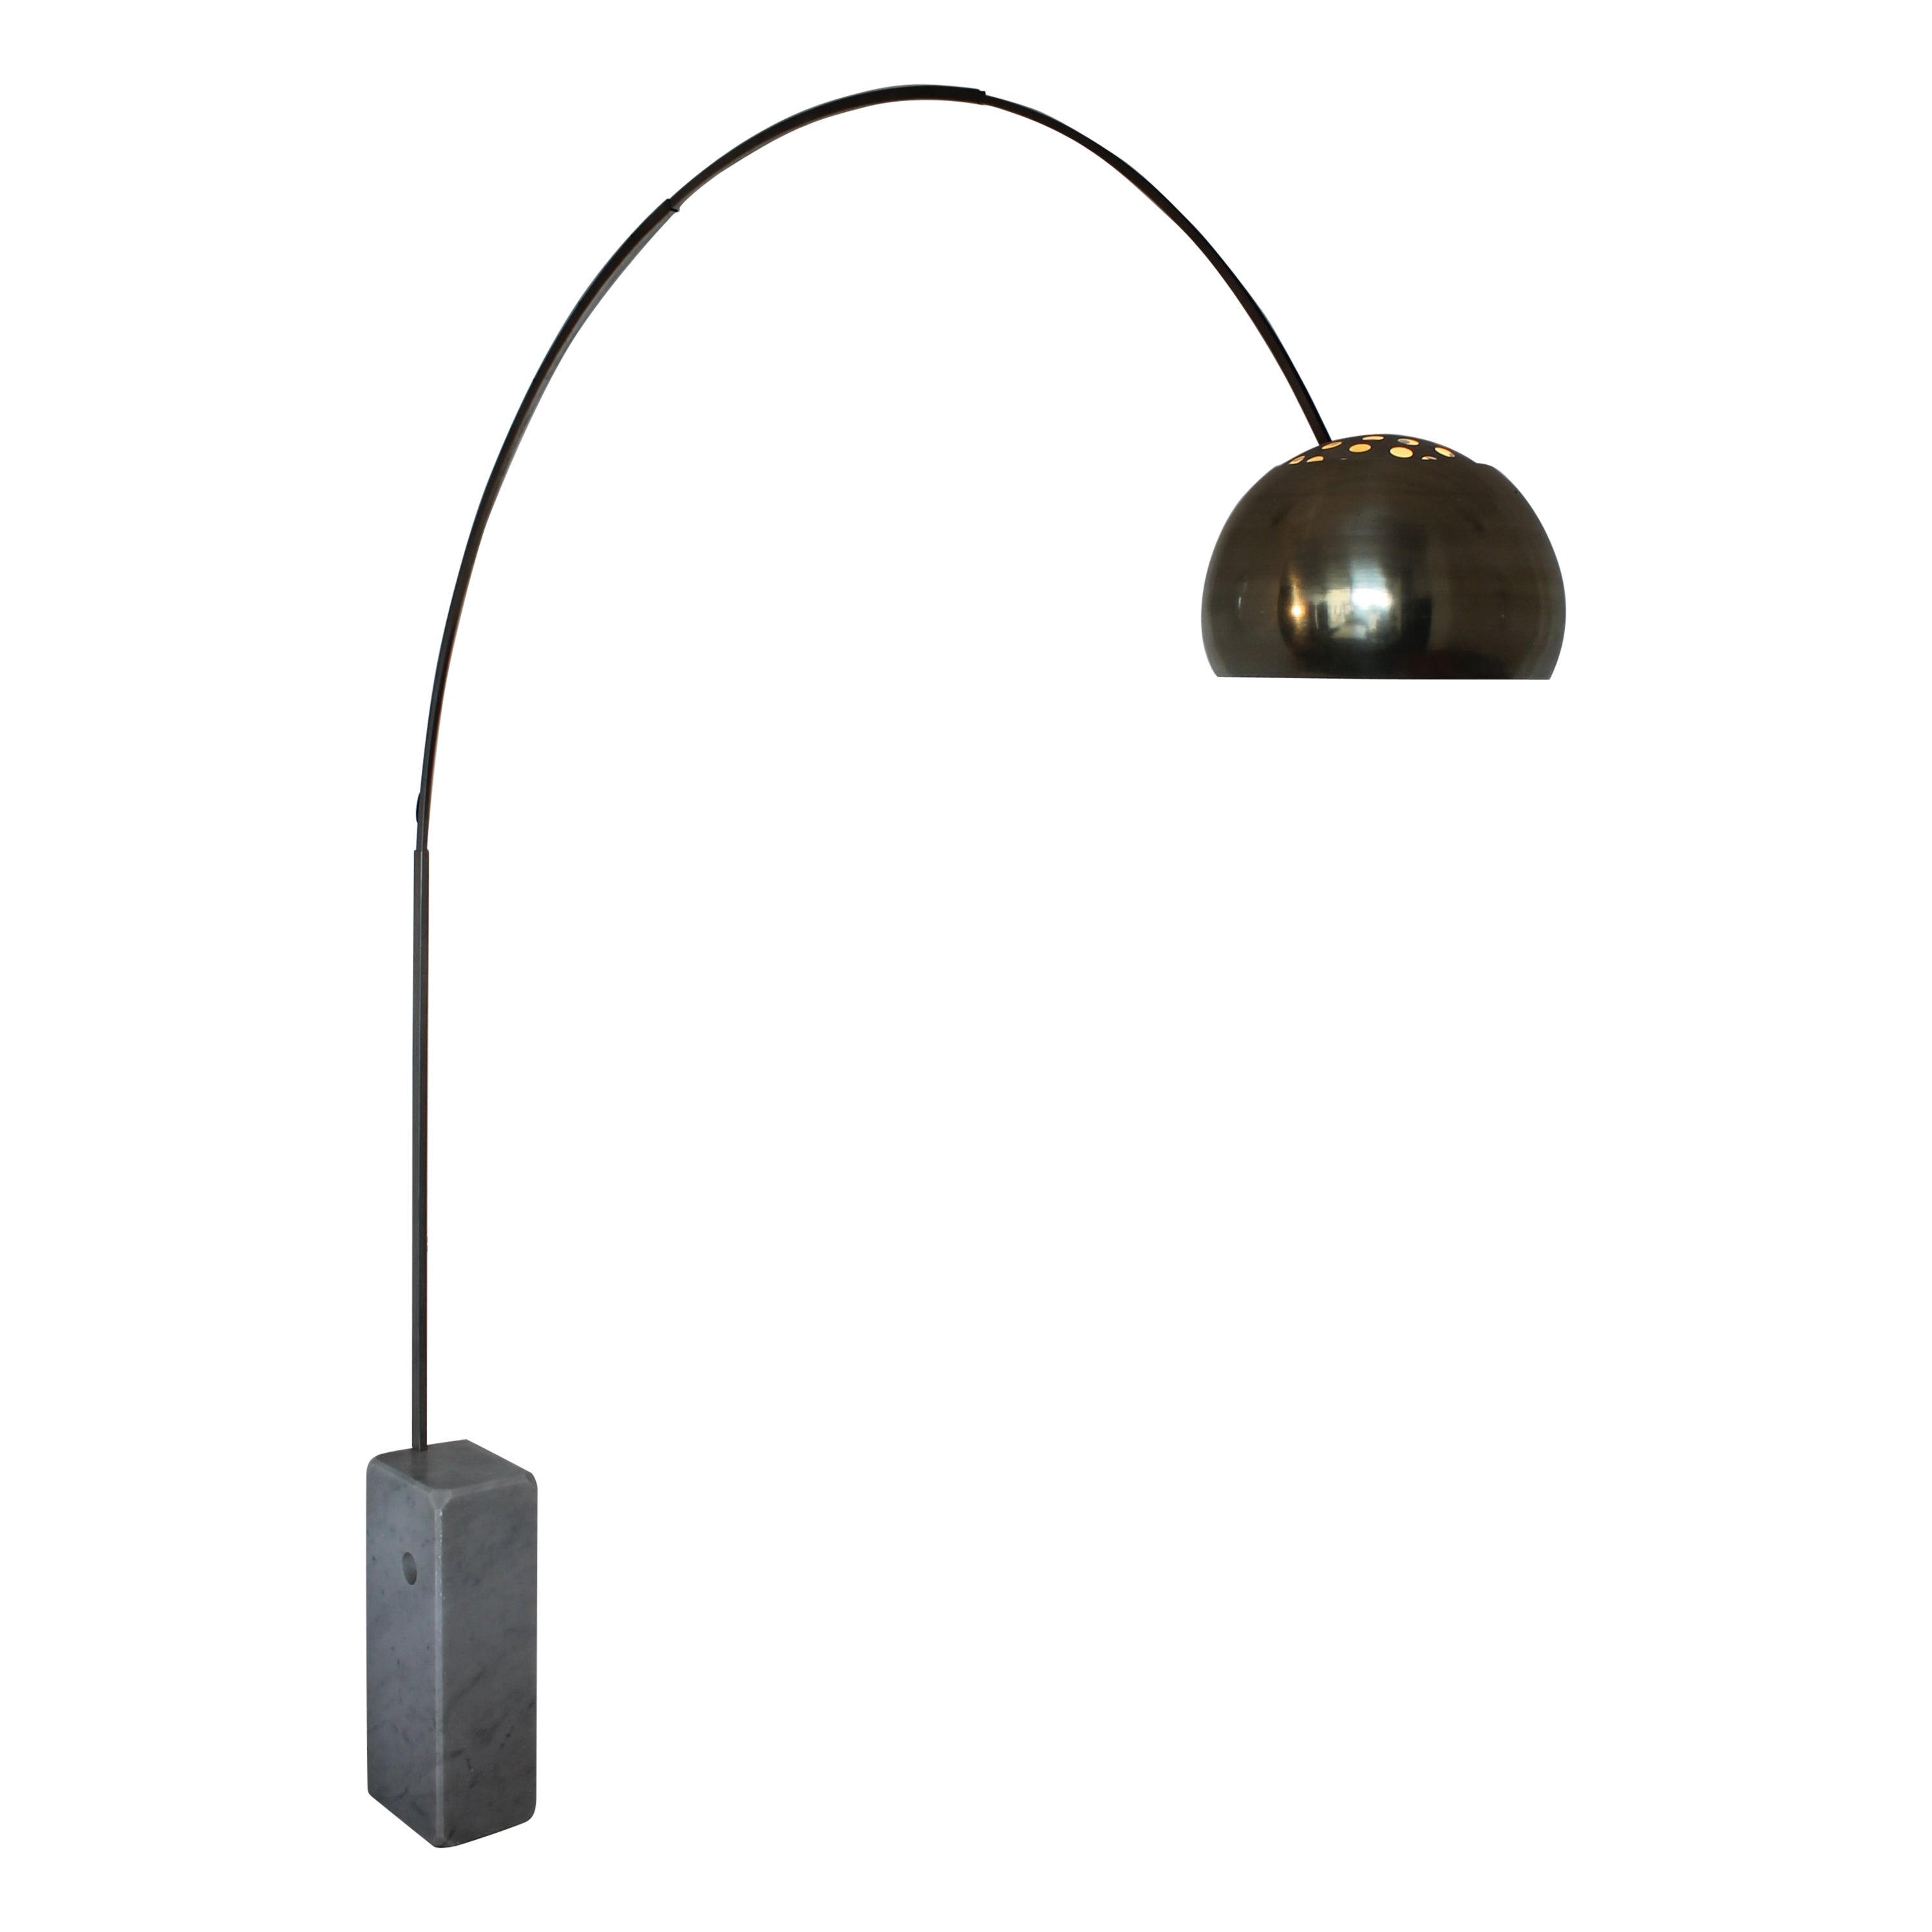 Arco Flos Lamp by Achille and Pier Giacomo Castiglioni, Italy '70s